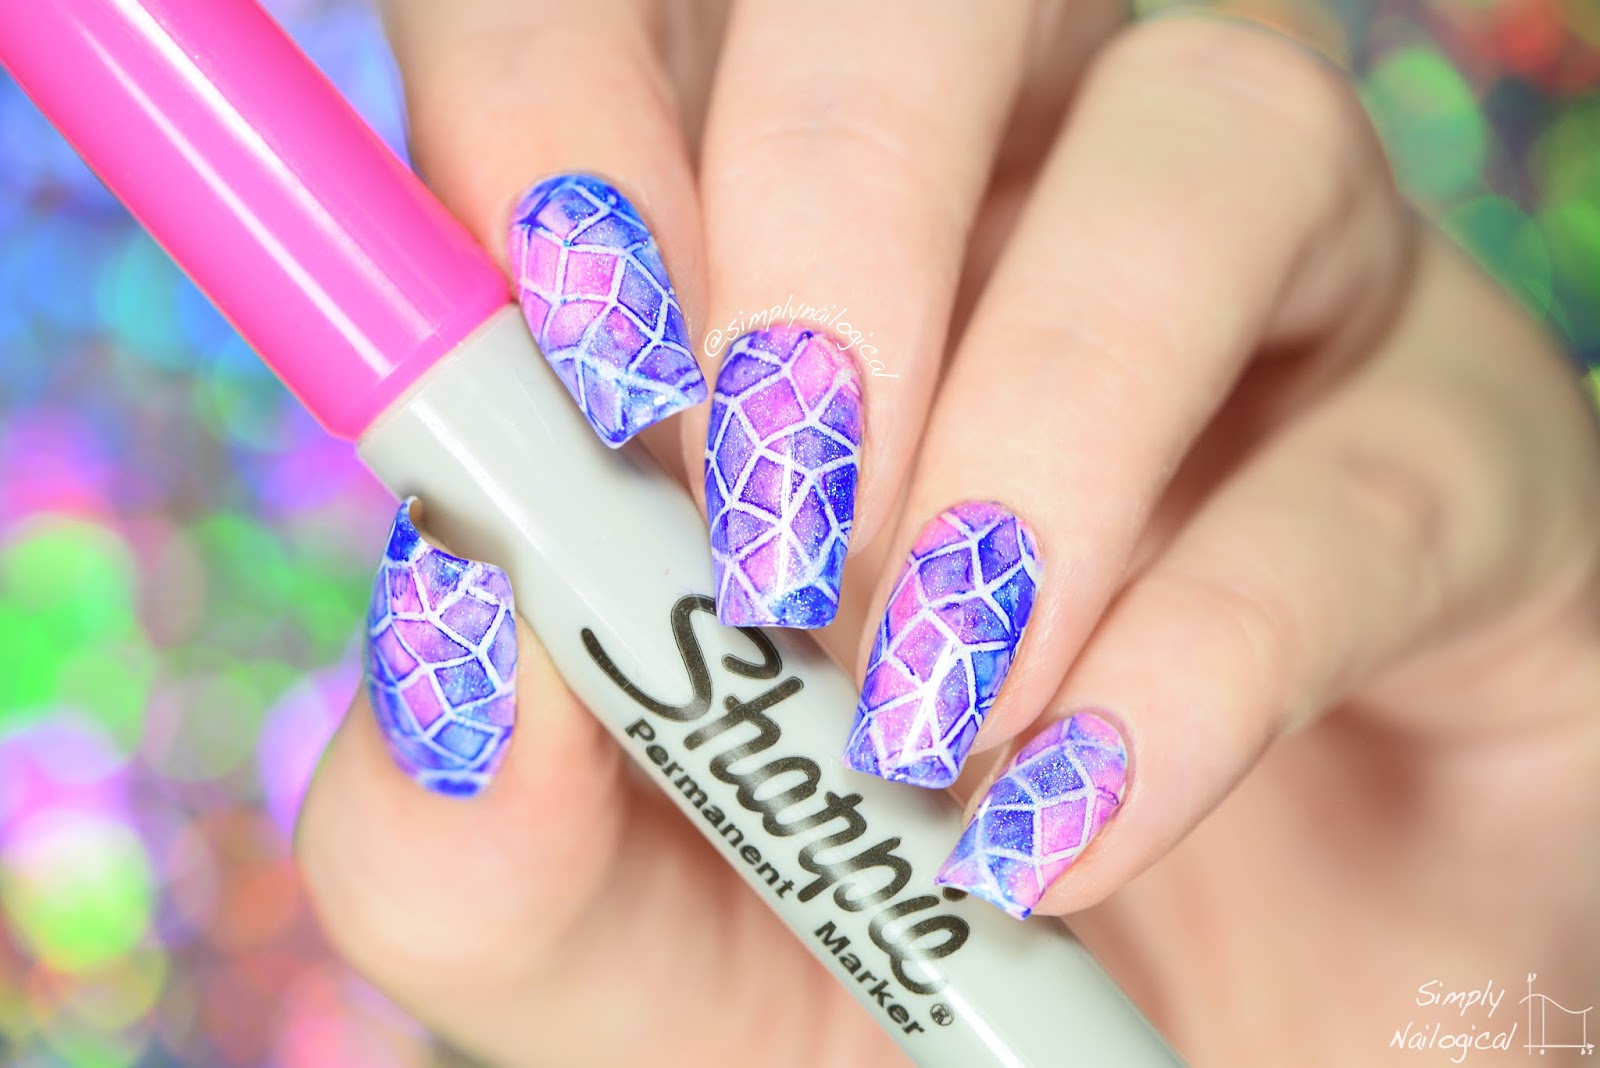 7. "Nail Art for Beginners" by Simply Nailogical - wide 1